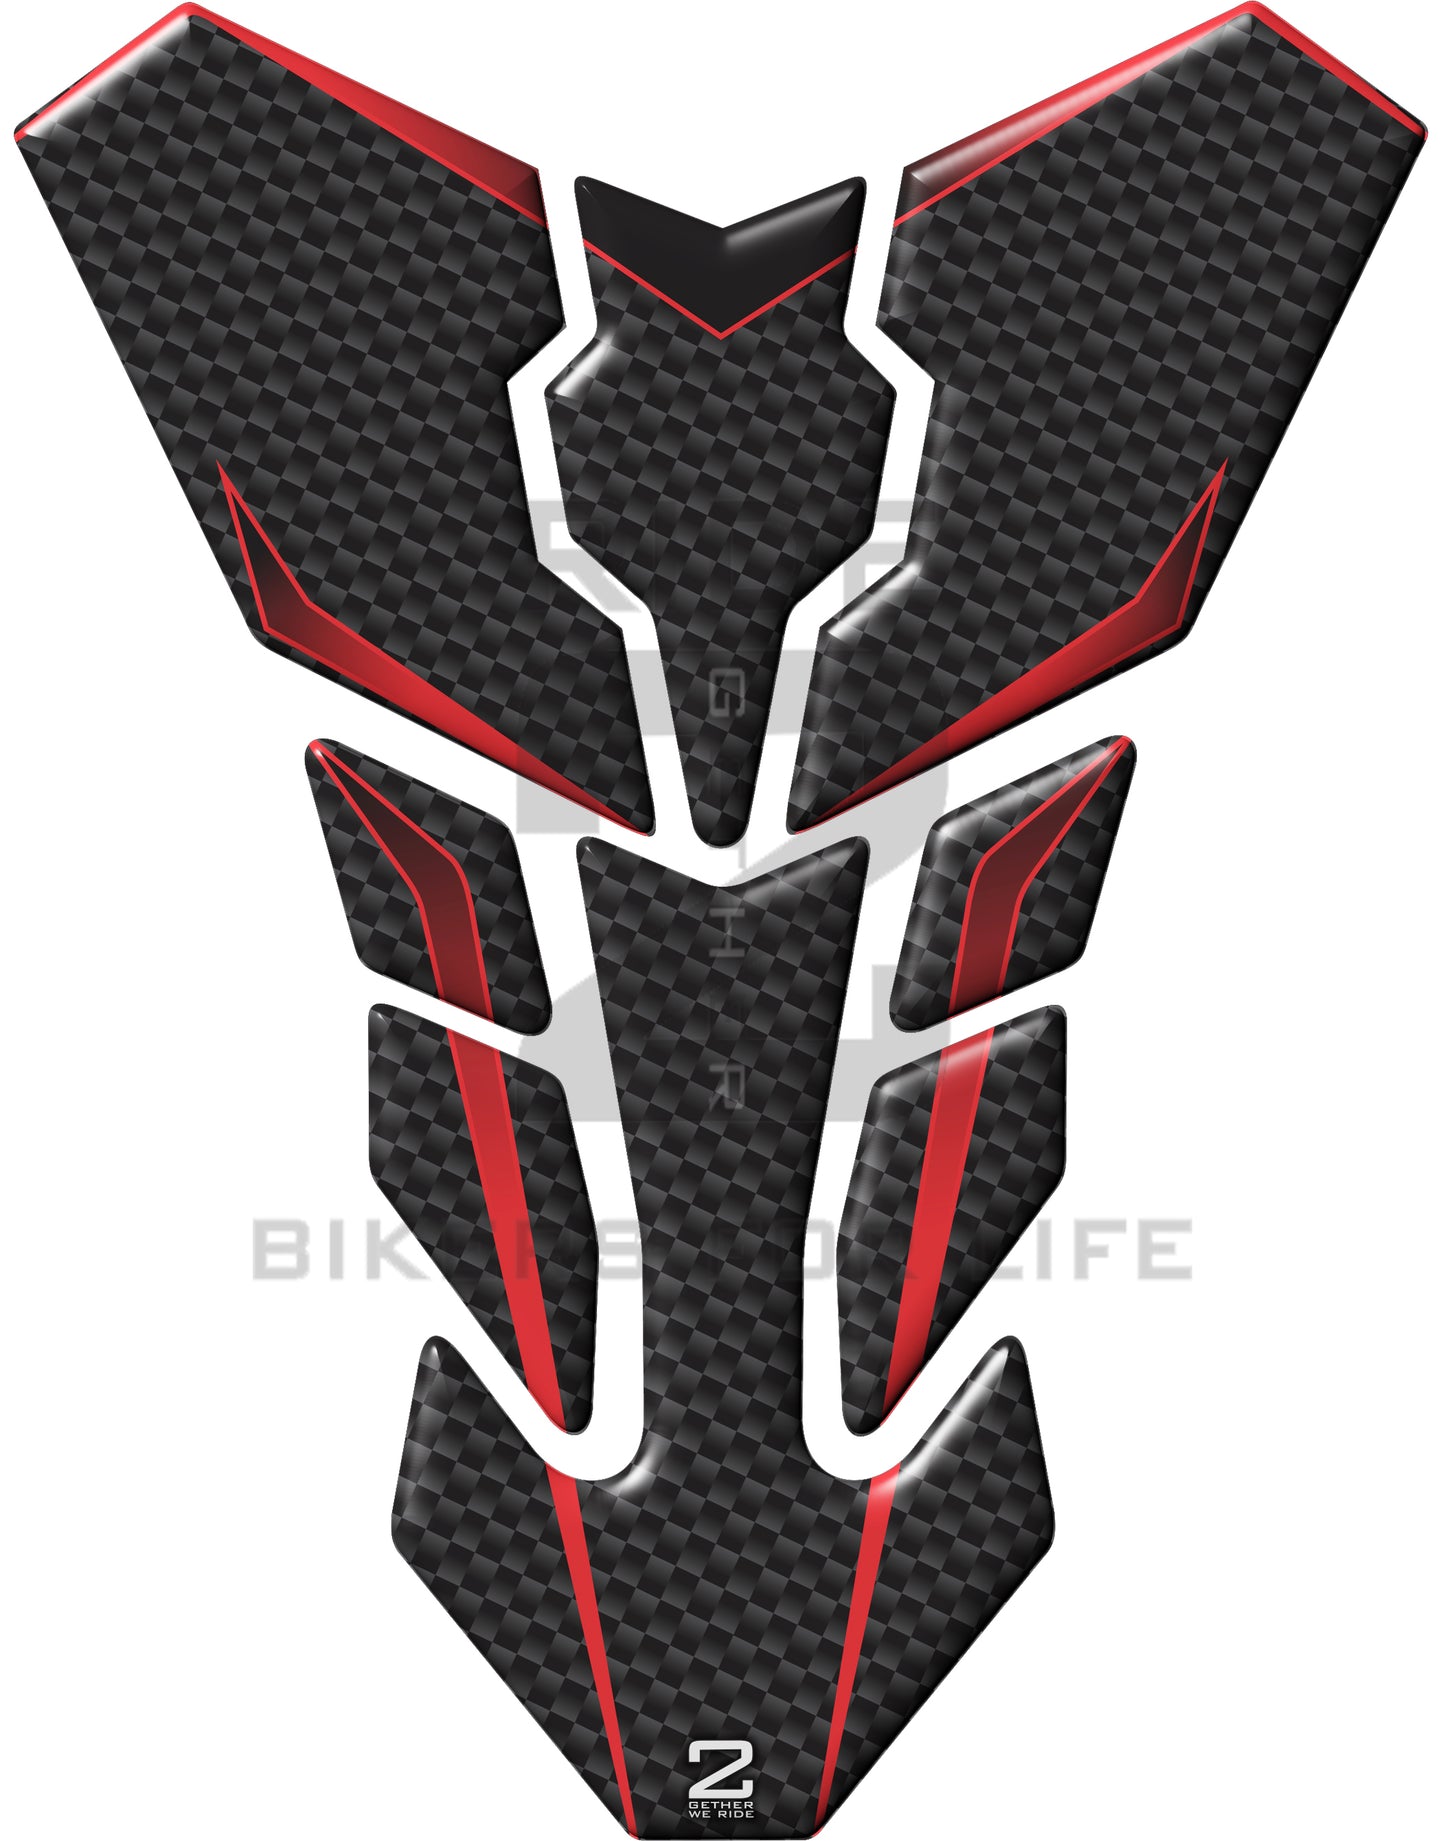 Universal Fit Black and Red Carbon Fibre Motor Bike Tank Pad Protector. A Street Pad which fits most motorcycles.